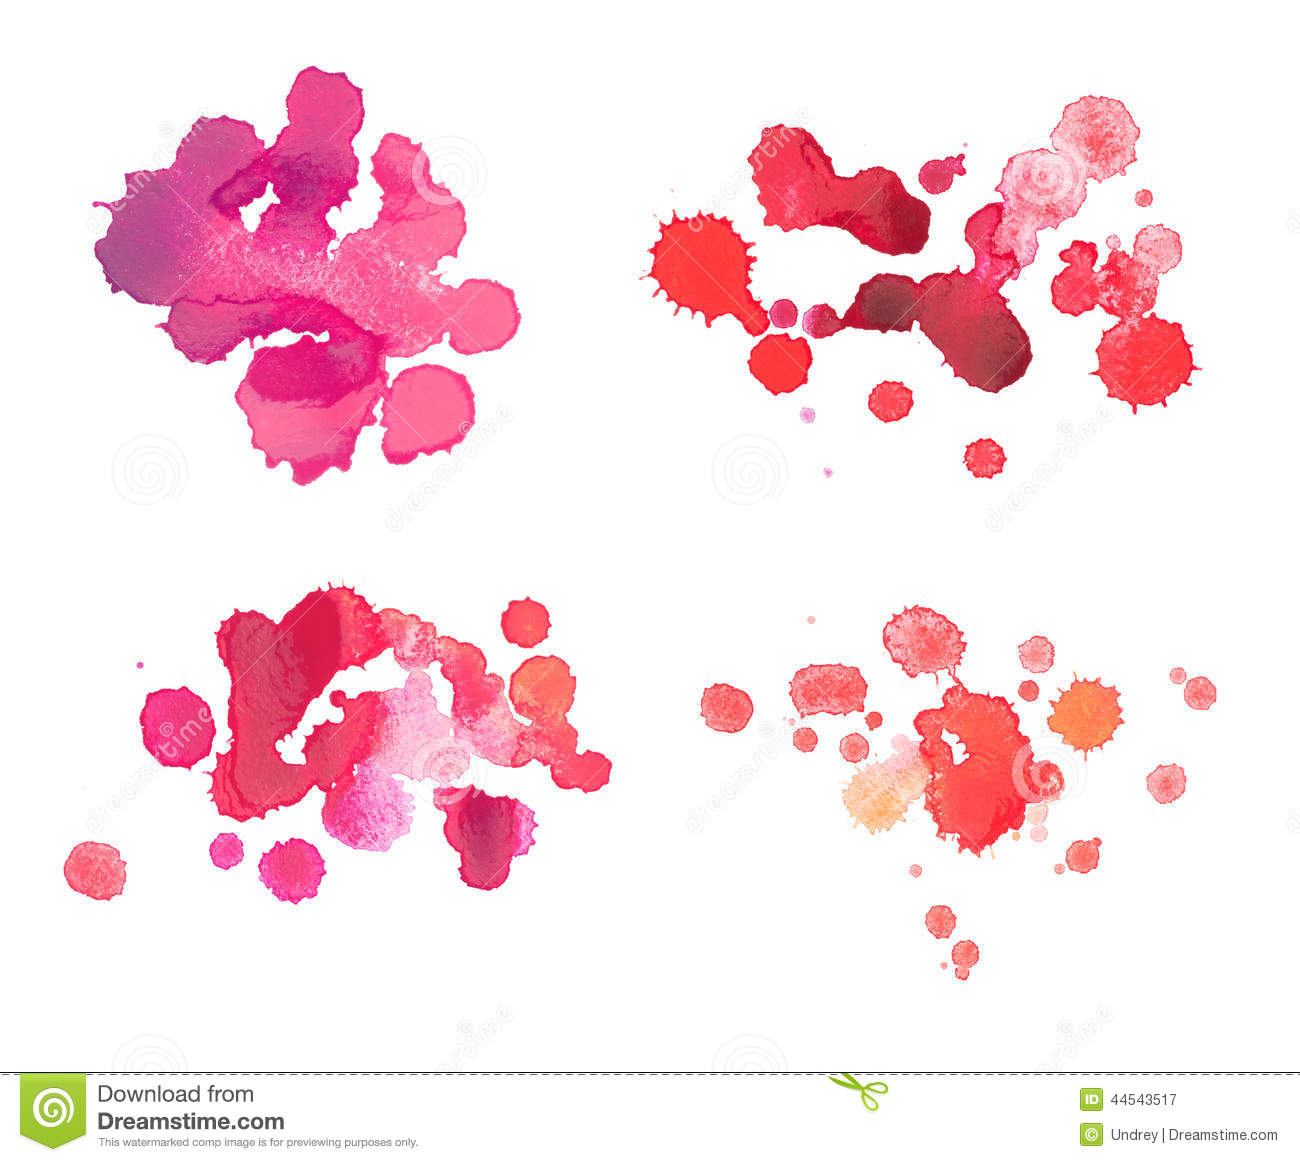 Abstract Watercolor Aquarelle Hand Drawn Red Blood Stock Photo   Image